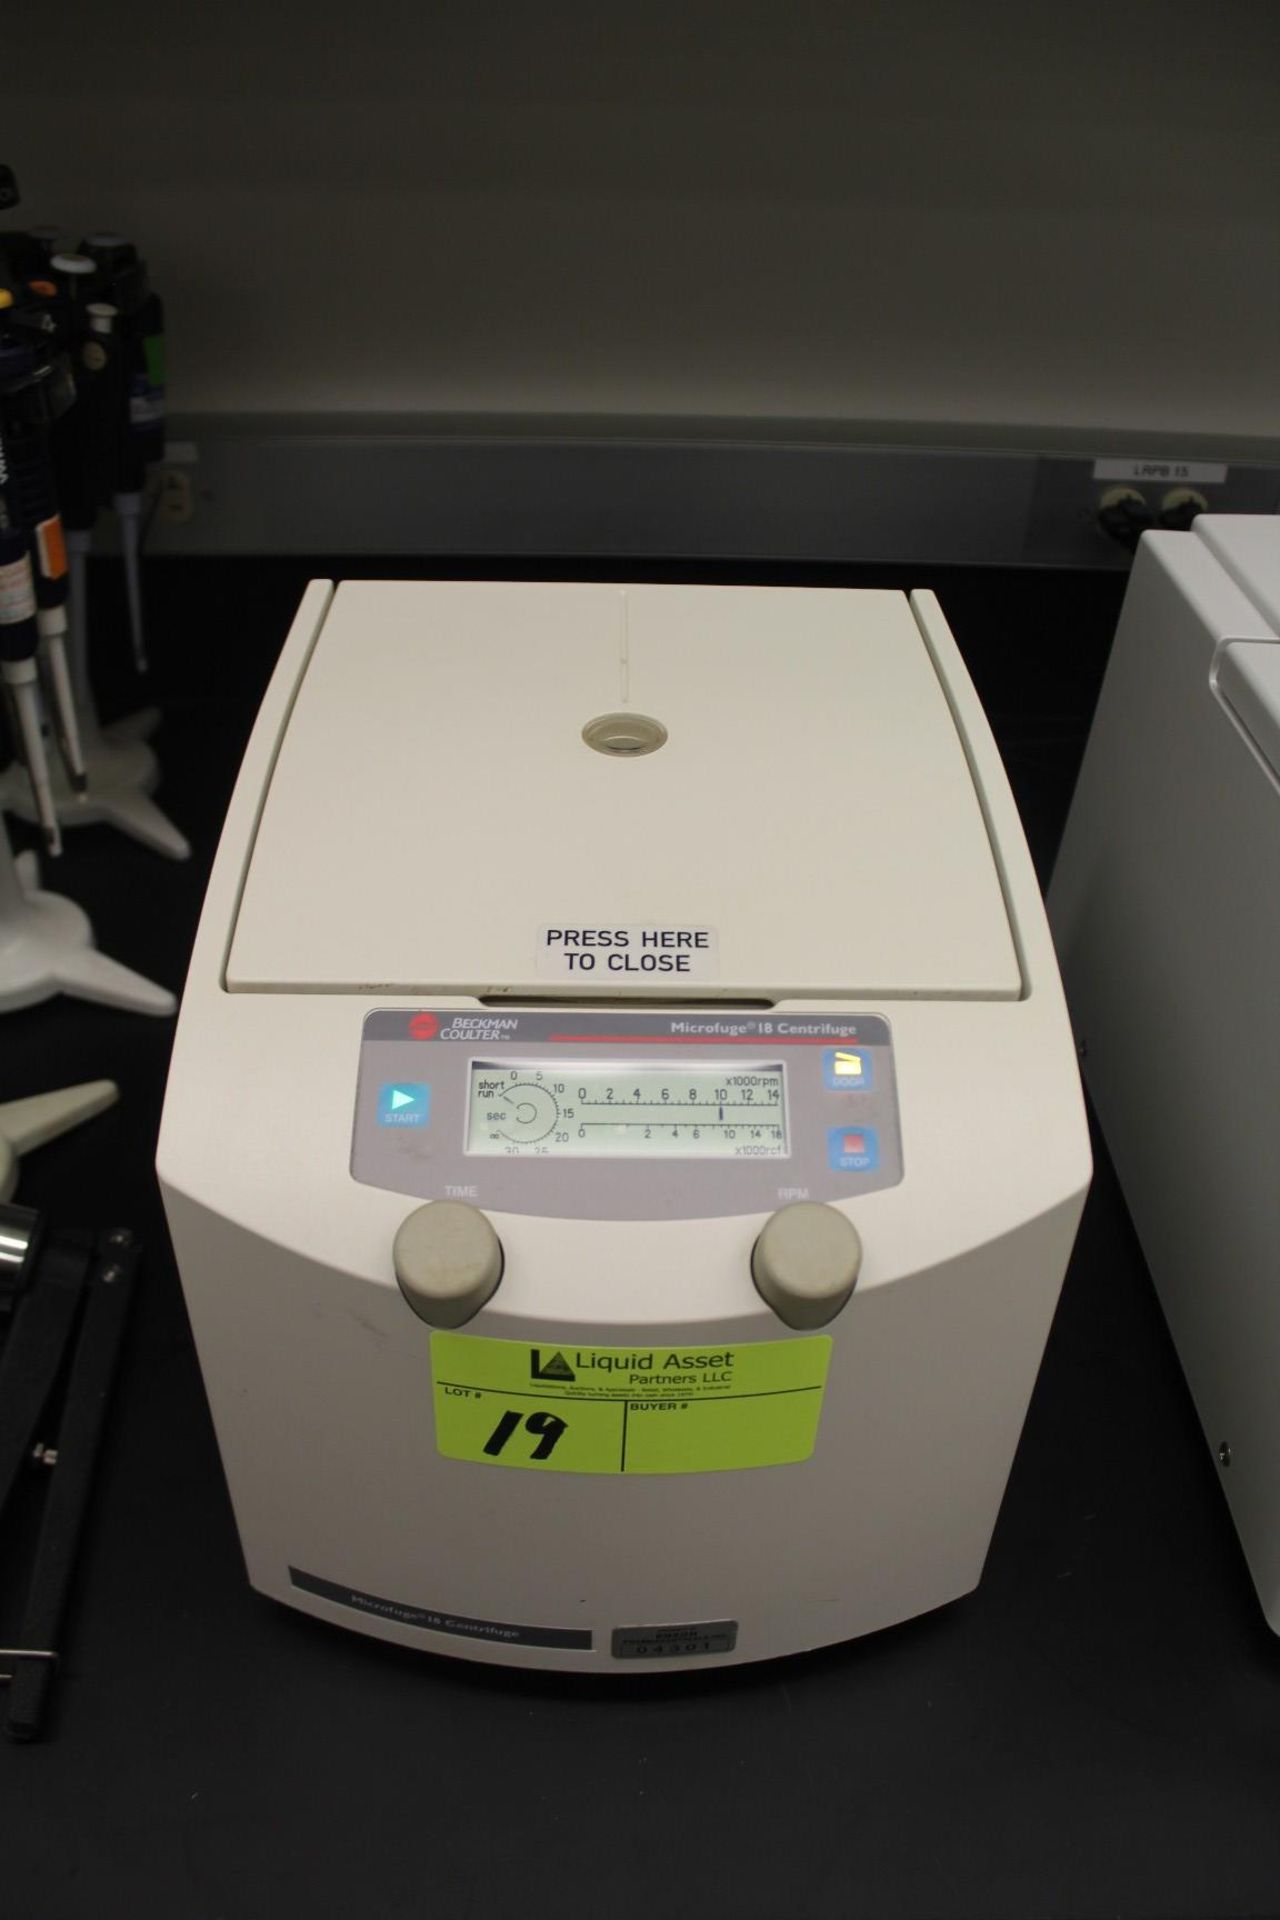 Beckman Coulter, Microfuge 18 Centrifuge, M# 367160, S/N MFA08E021